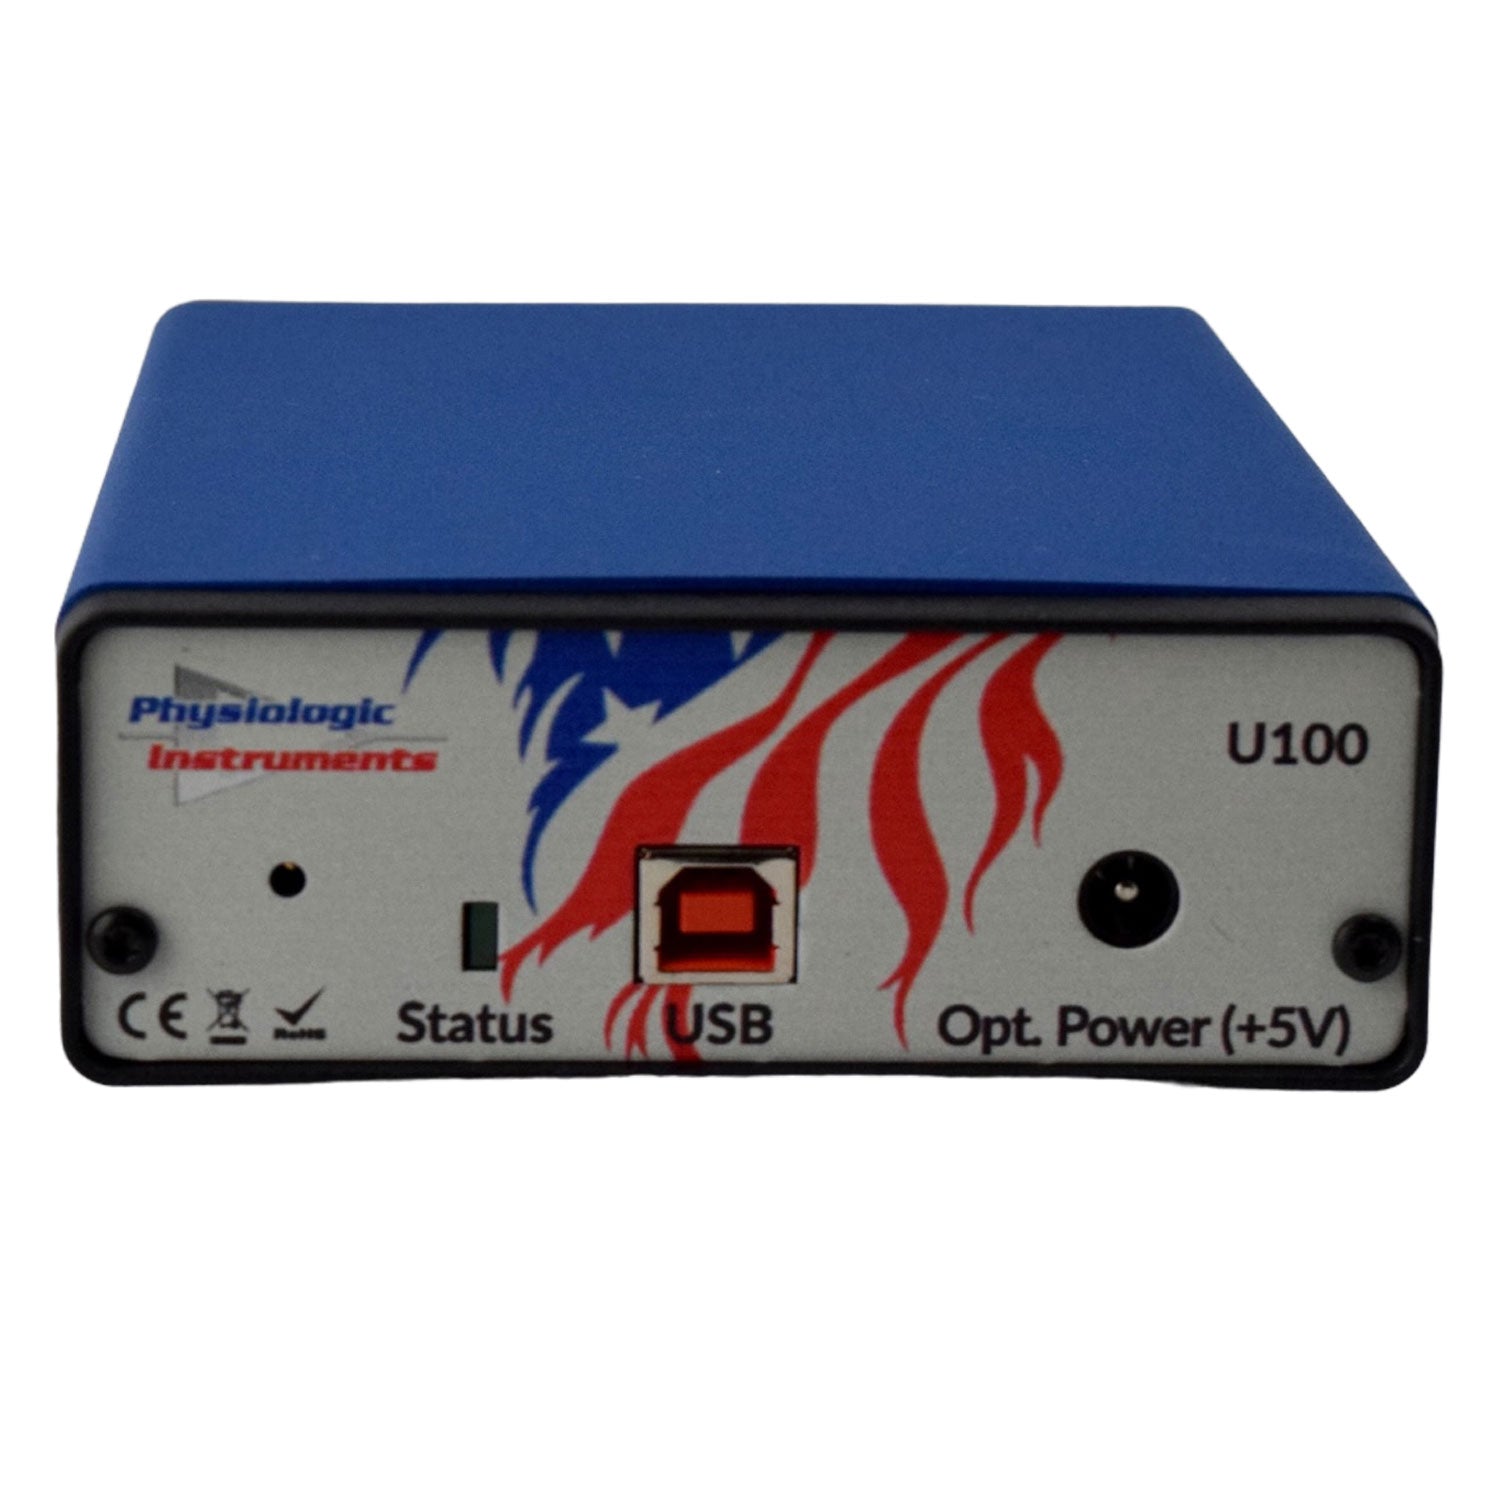 Data Acquisition System Hardware for A&A U100